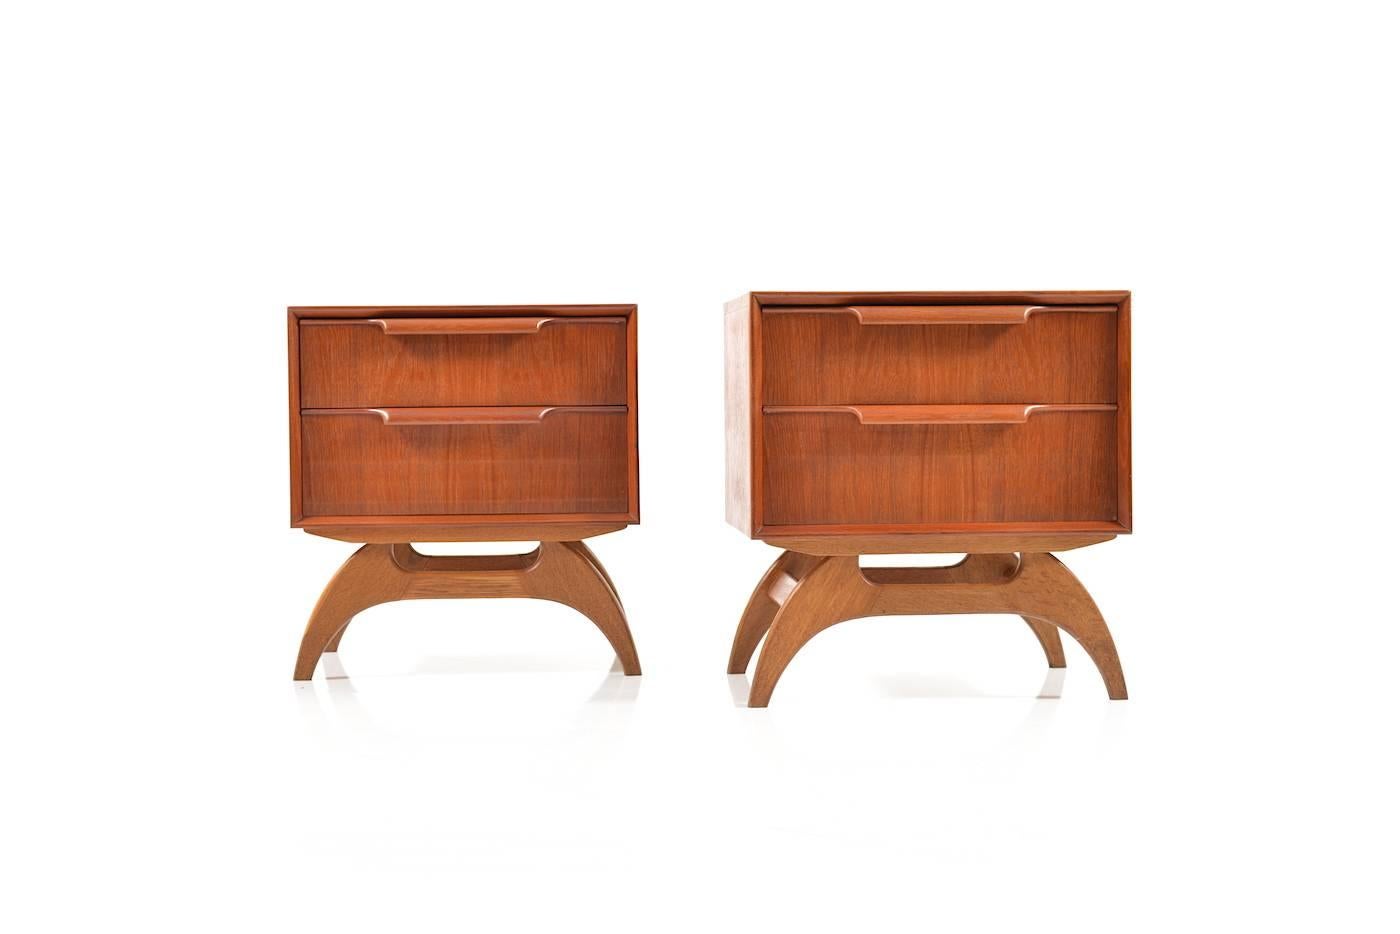 Rare small pair of Danish chest of drawers in teak and ok. Organic legs in solid oakwood. Two drawers each chest. Denmark, early 1950s. In very good original stand.